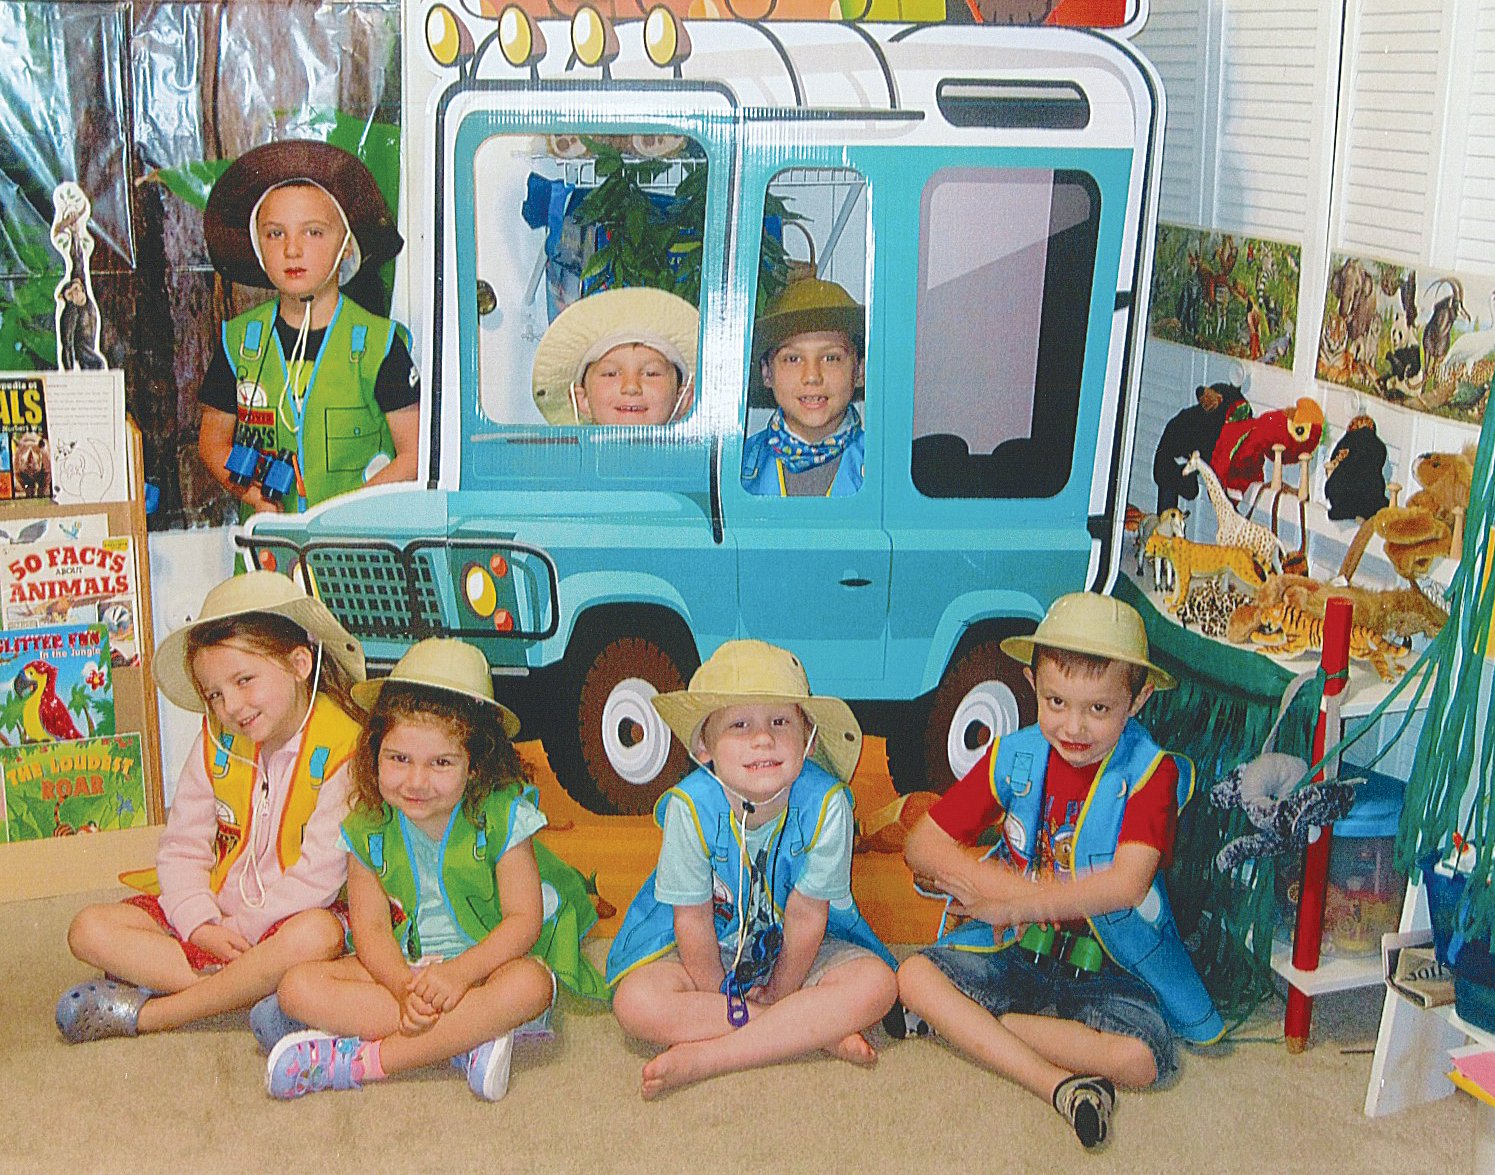 The students of Pattee Learning Center are pictured in their reading Jeep as they review and prepare a program for their parents on July 8. They all enjoyed a four-week study of the jungle and animals of the forest. Each of the students were able to improve their reading skills during this experience. Mrs. Pat Harwood announced the fall read enrollment will begin Aug. 9. She works with each student individually to help them improve their reading skills. She works with children age five to fifth grade. Call 765-362-3625 for more information. Pictured in the Jeep are Carter Bokhart, Reid Gerold and Jameson Whitecotton. Pictured outside the Jeep are Elizabeth Ryker, Delaney Whitecotton, Michael Nunan and Ezra Mortoura. Not pictured are Fletcher Petrie and Wyatt Pickett.